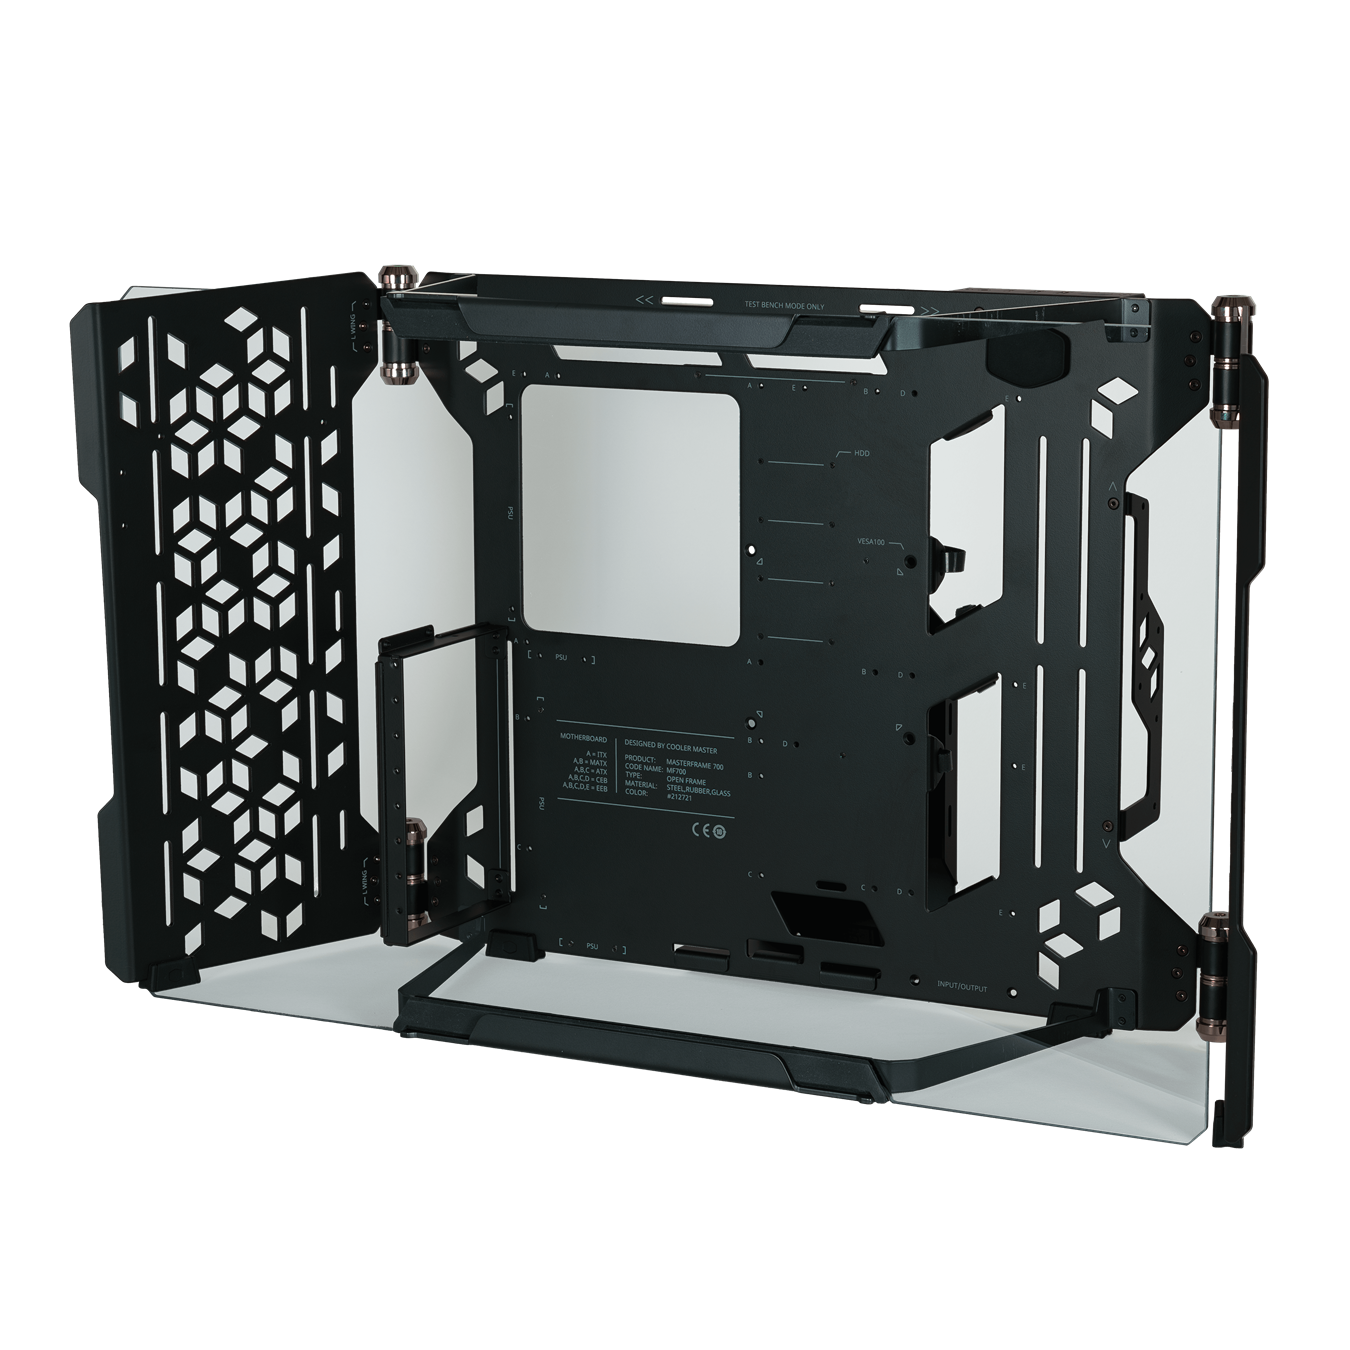 MasterFrame 700 provides a flexible pump and reservoir mounting location and support for multiple triple-fan radiators.